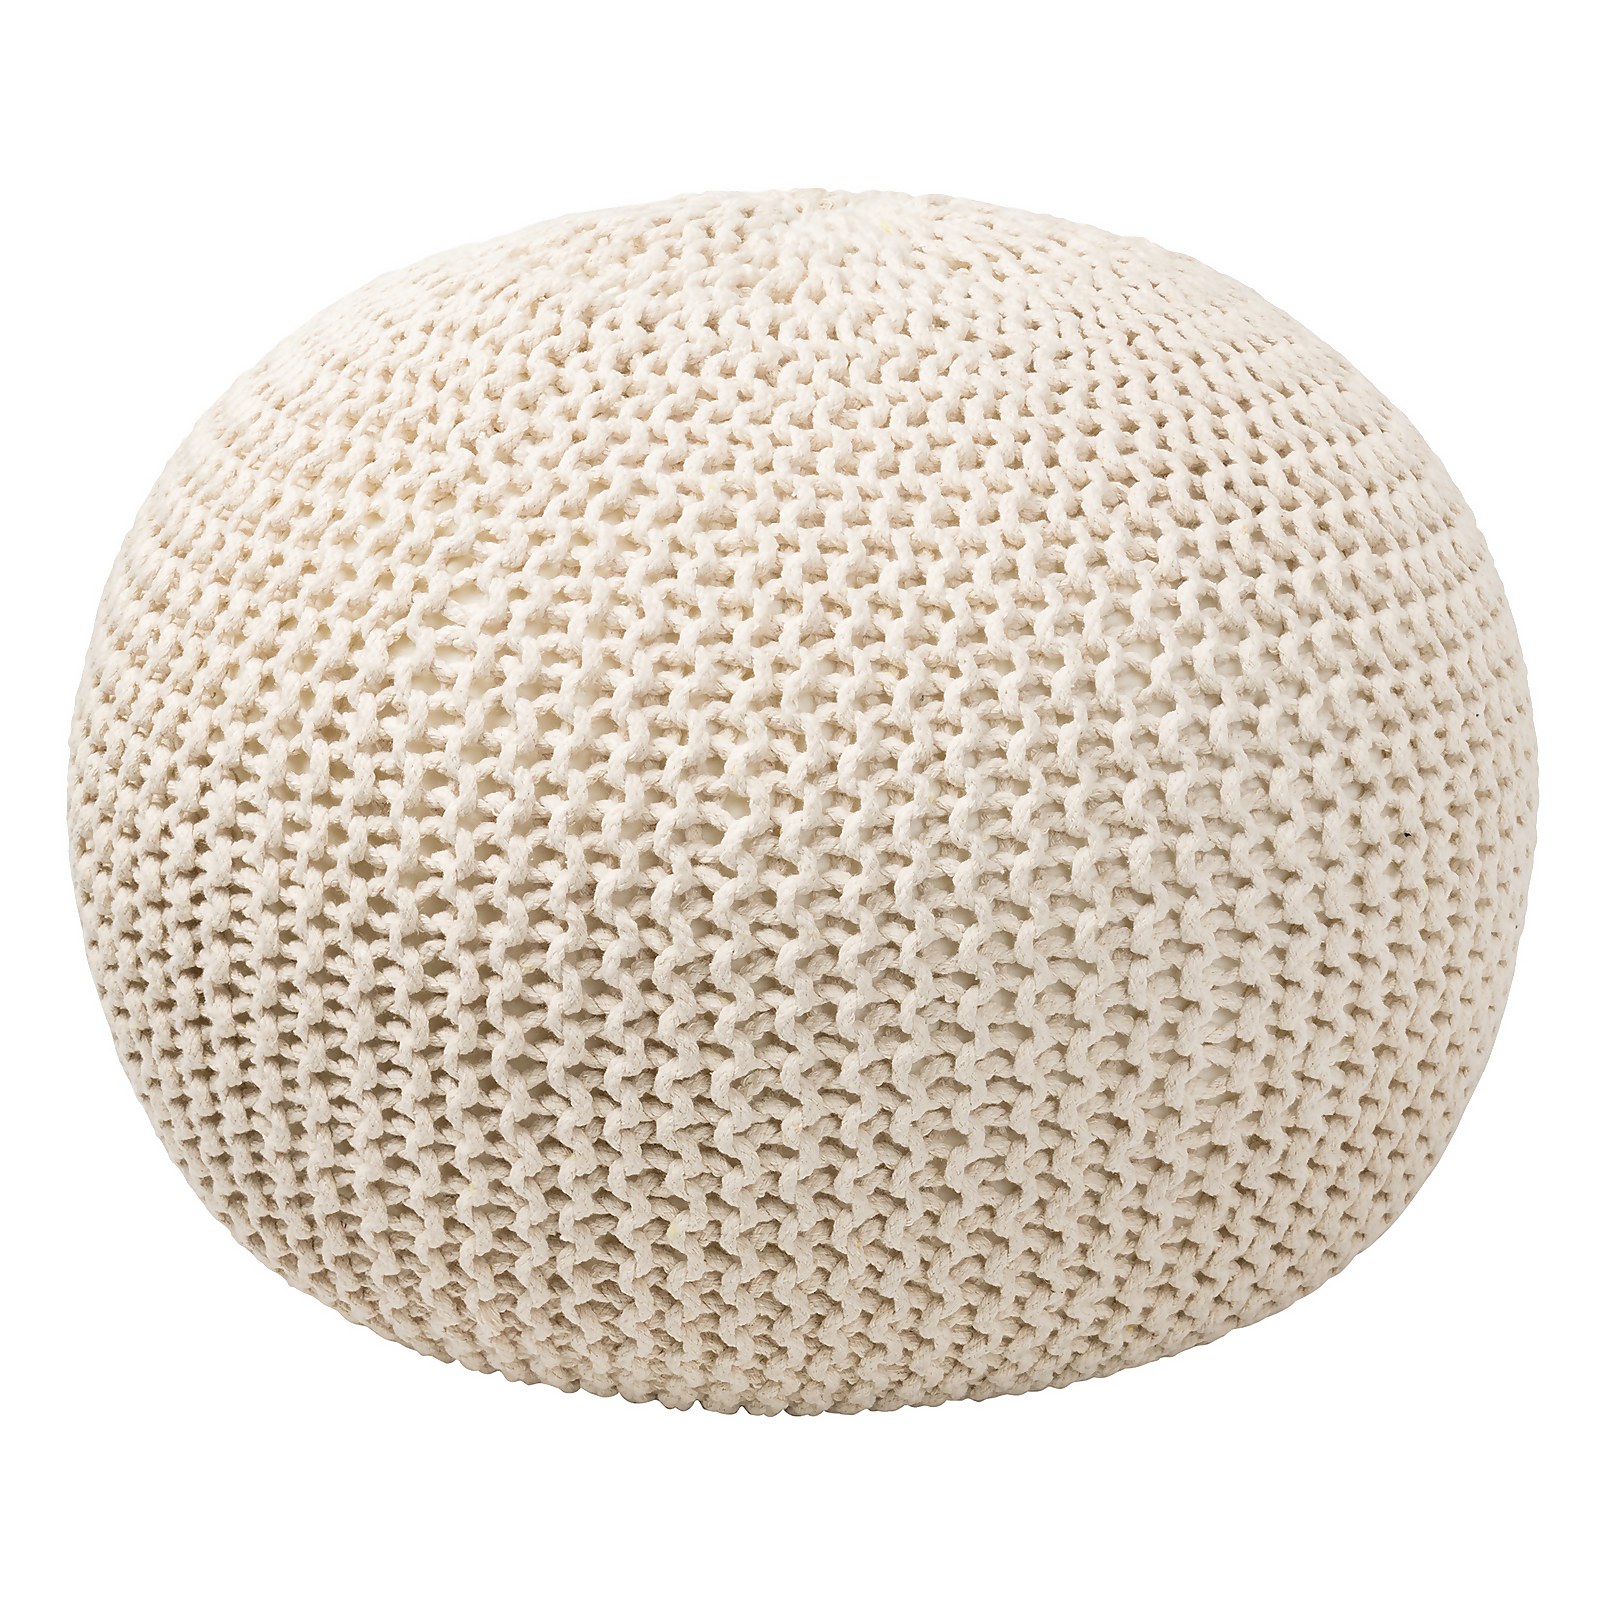 Photo of Charles Chunky Knit Pouffe - Cream